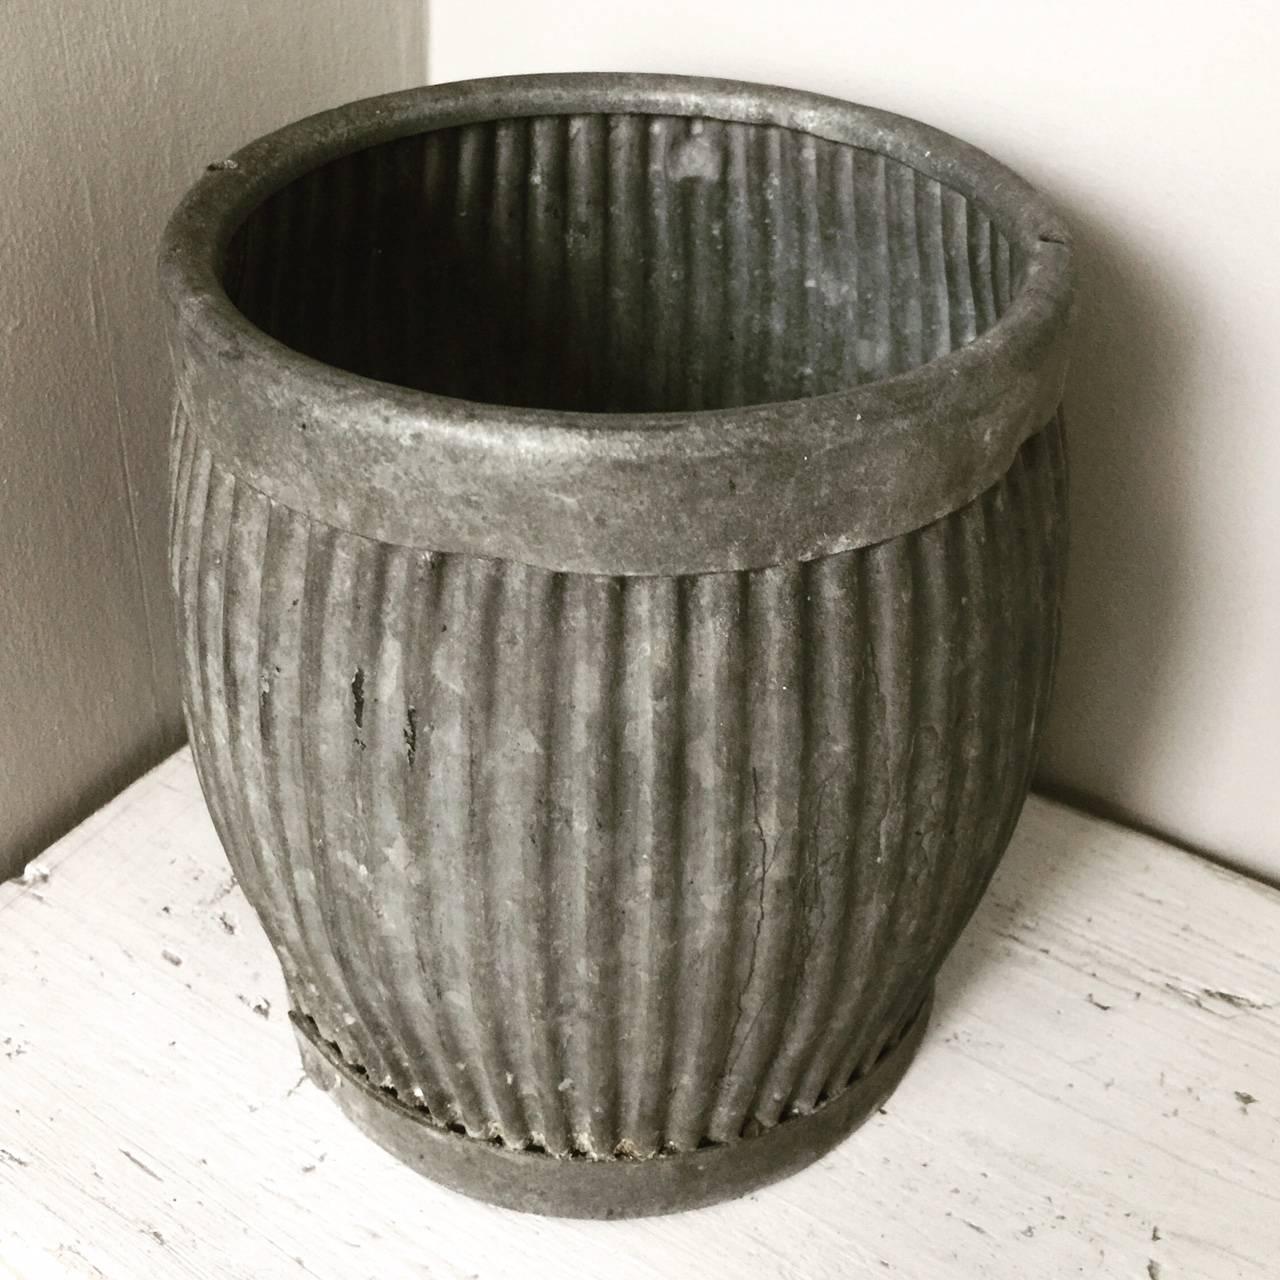 Rare vintage antique salesman’s sample zinc galvanised wash dolly pos tub with a ribbed designe pattern.